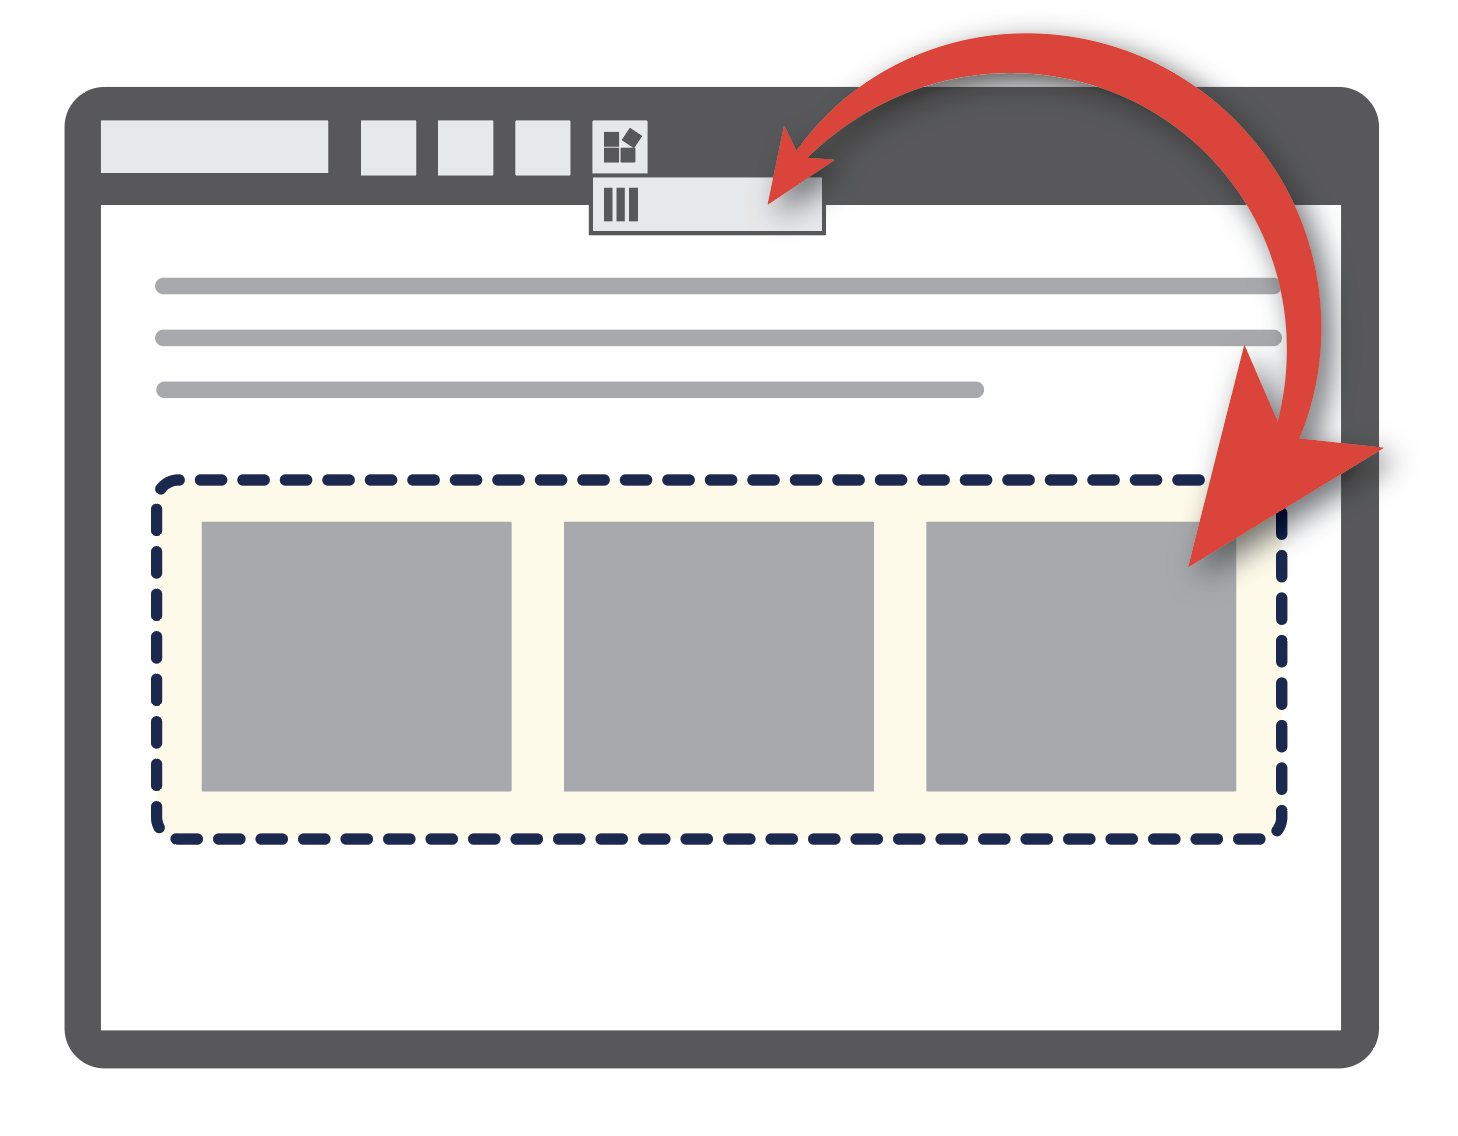 An illustration showing the layout columns widget layout option.